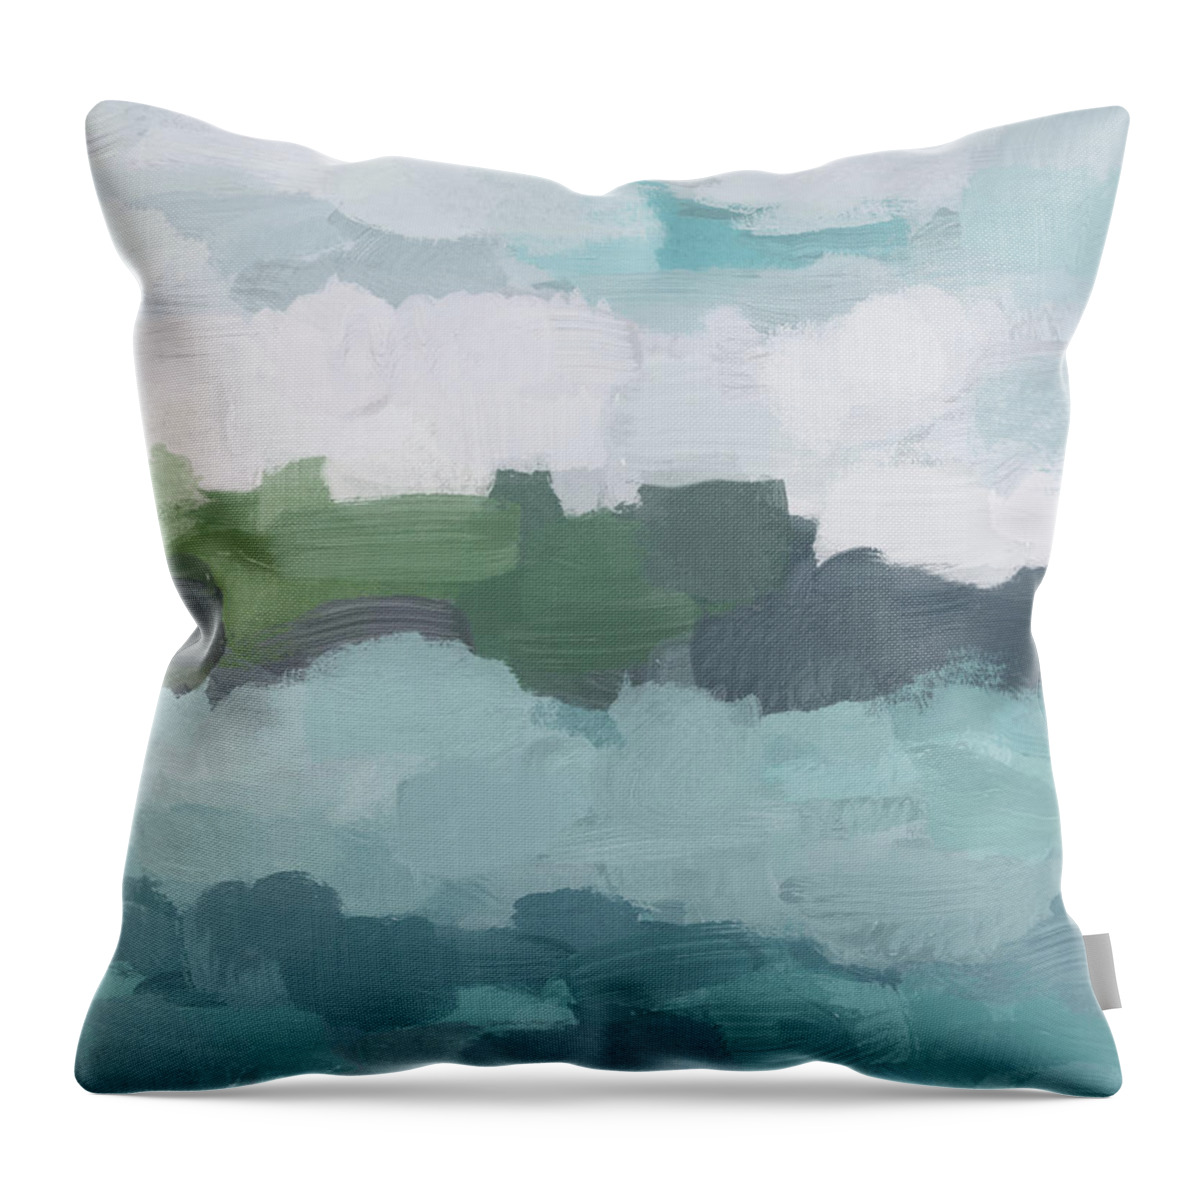 Aqua Blue Green Teal Throw Pillow featuring the painting Island in the Distance II by Rachel Elise